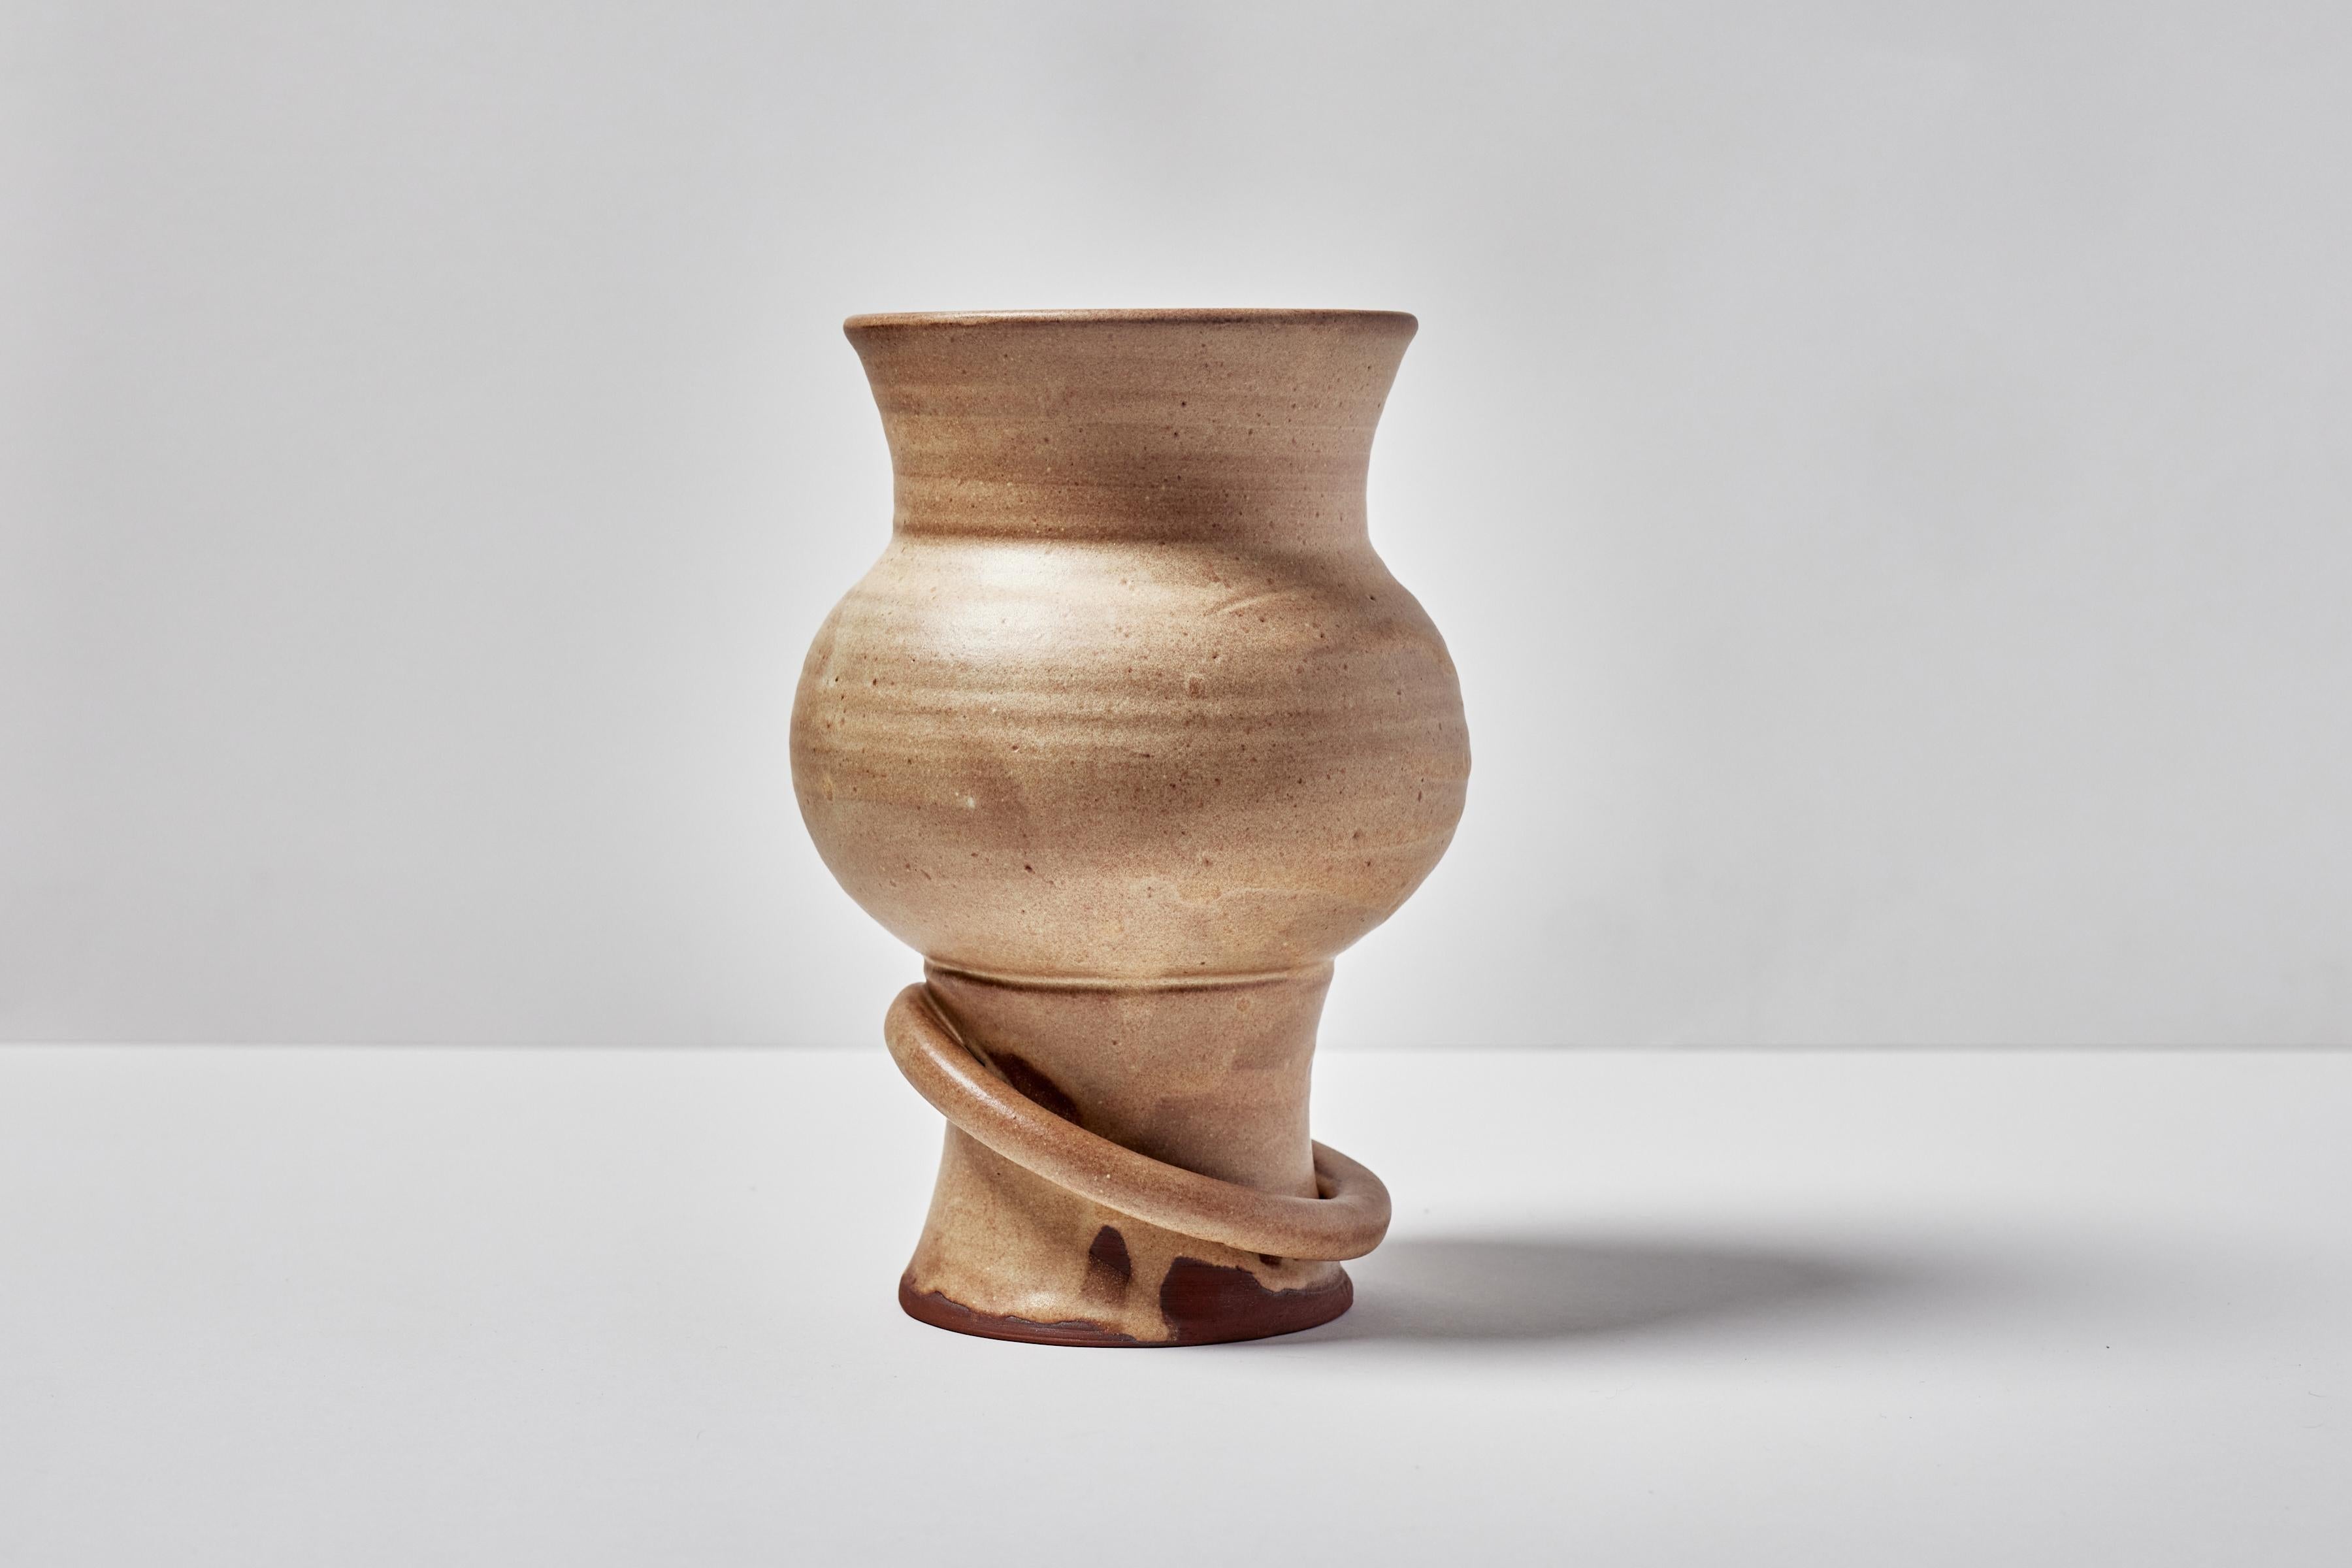 This original Mojave Pedestal Bracelet Vase is hand-crafted by Erin Hupp. All three components - the base, bracelet and vase - are turned individually on the potter's wheel and assembled into the full pedestal bracelet vase. Erin's Bracelet